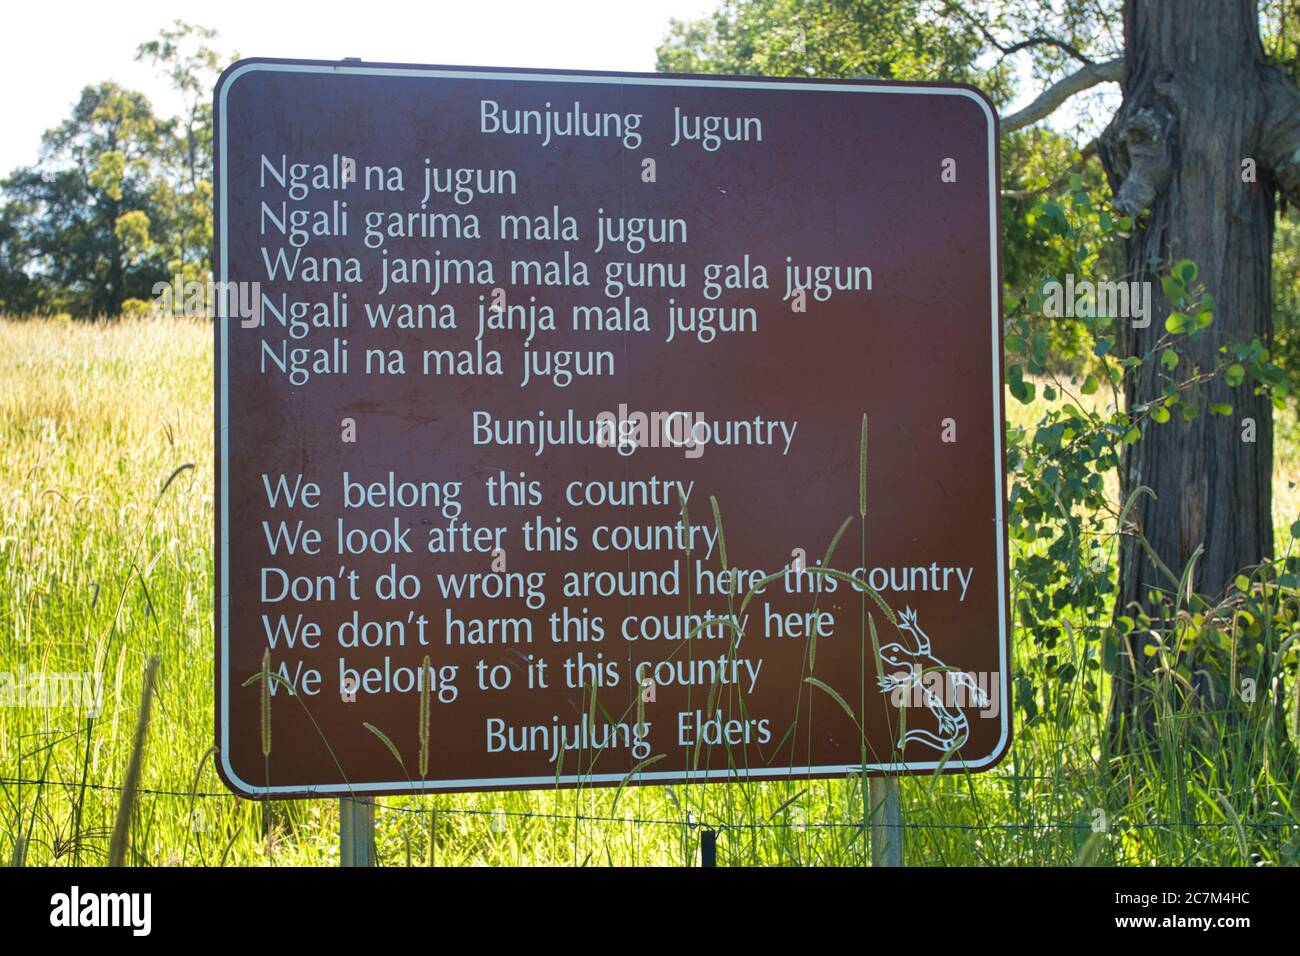 A sign in the country in both english and aboriginal languages to say the aboriginals belong to the land, in central eastern NSW., Australia Stock Photo